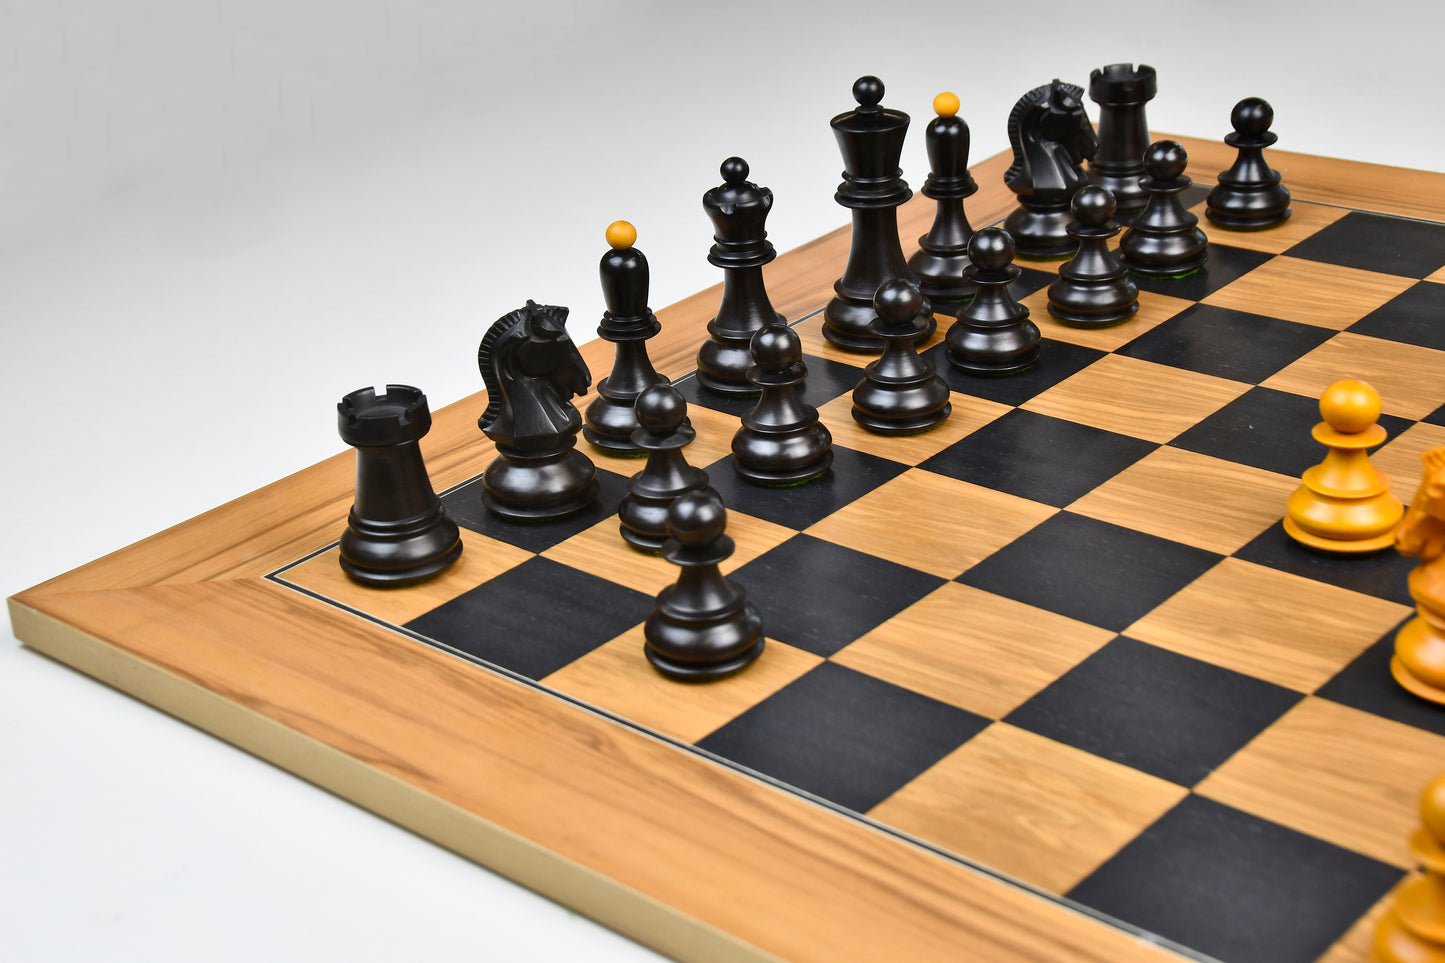 1950 Repro Dubrovnik Bobby Fischer Chessmen Version 3.0 in Ebonized & Antiqued boxwood - 3.7" King with Board